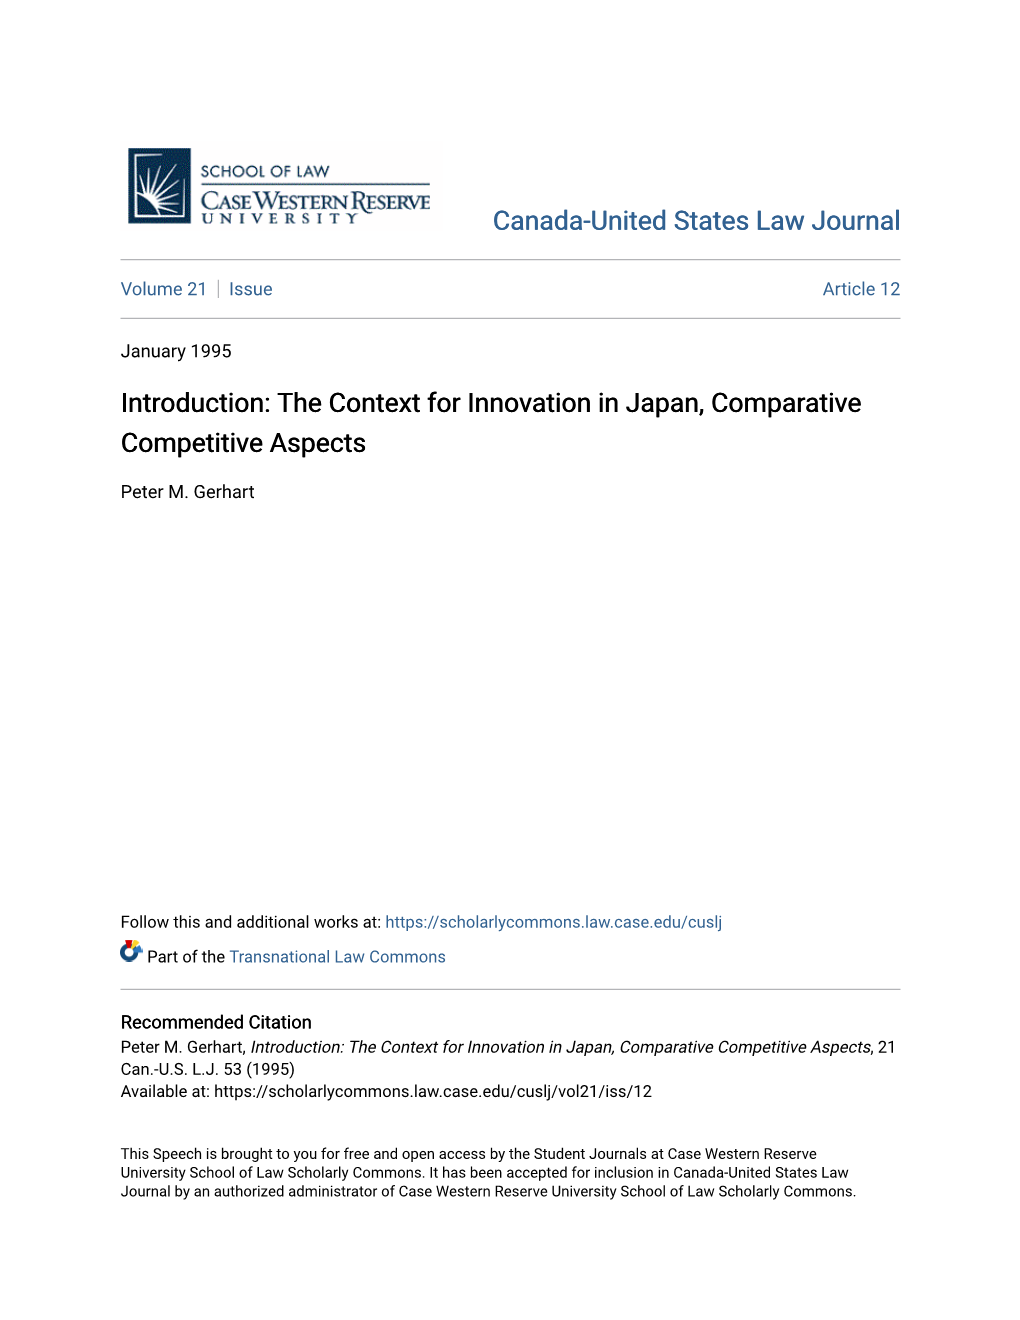 The Context for Innovation in Japan, Comparative Competitive Aspects